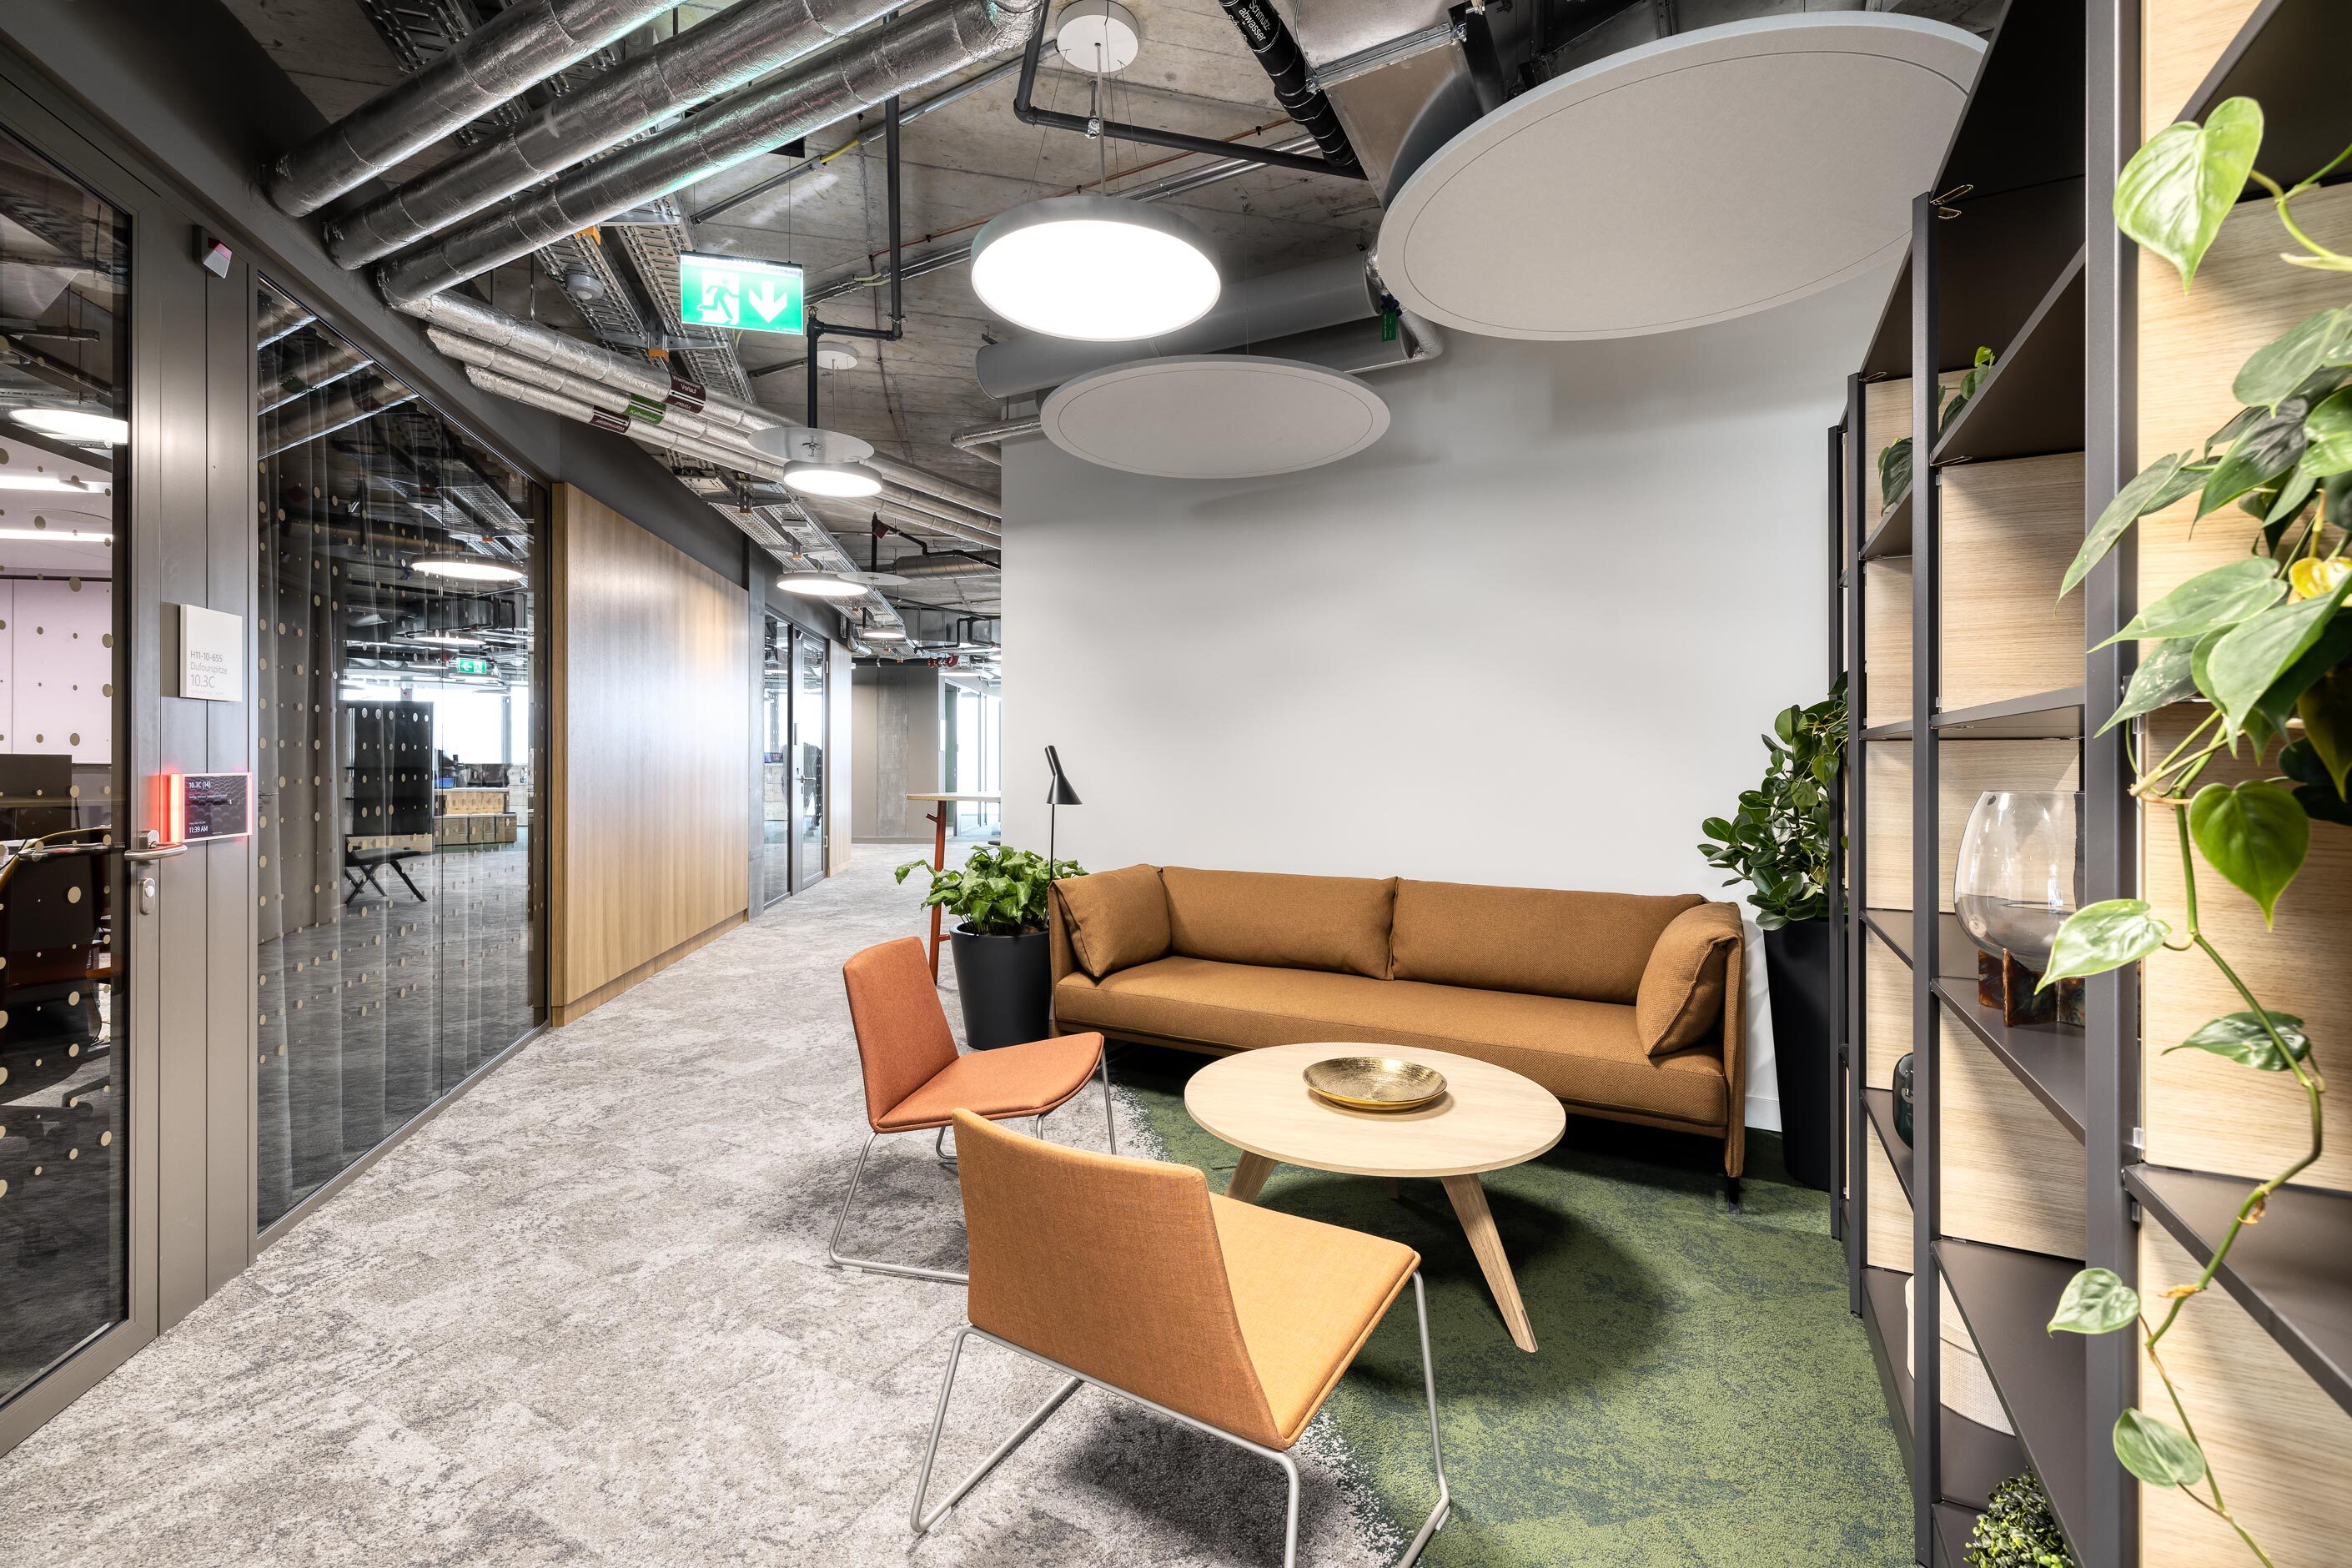 biophilic, sustainable office working environment for the approximately 600 employee